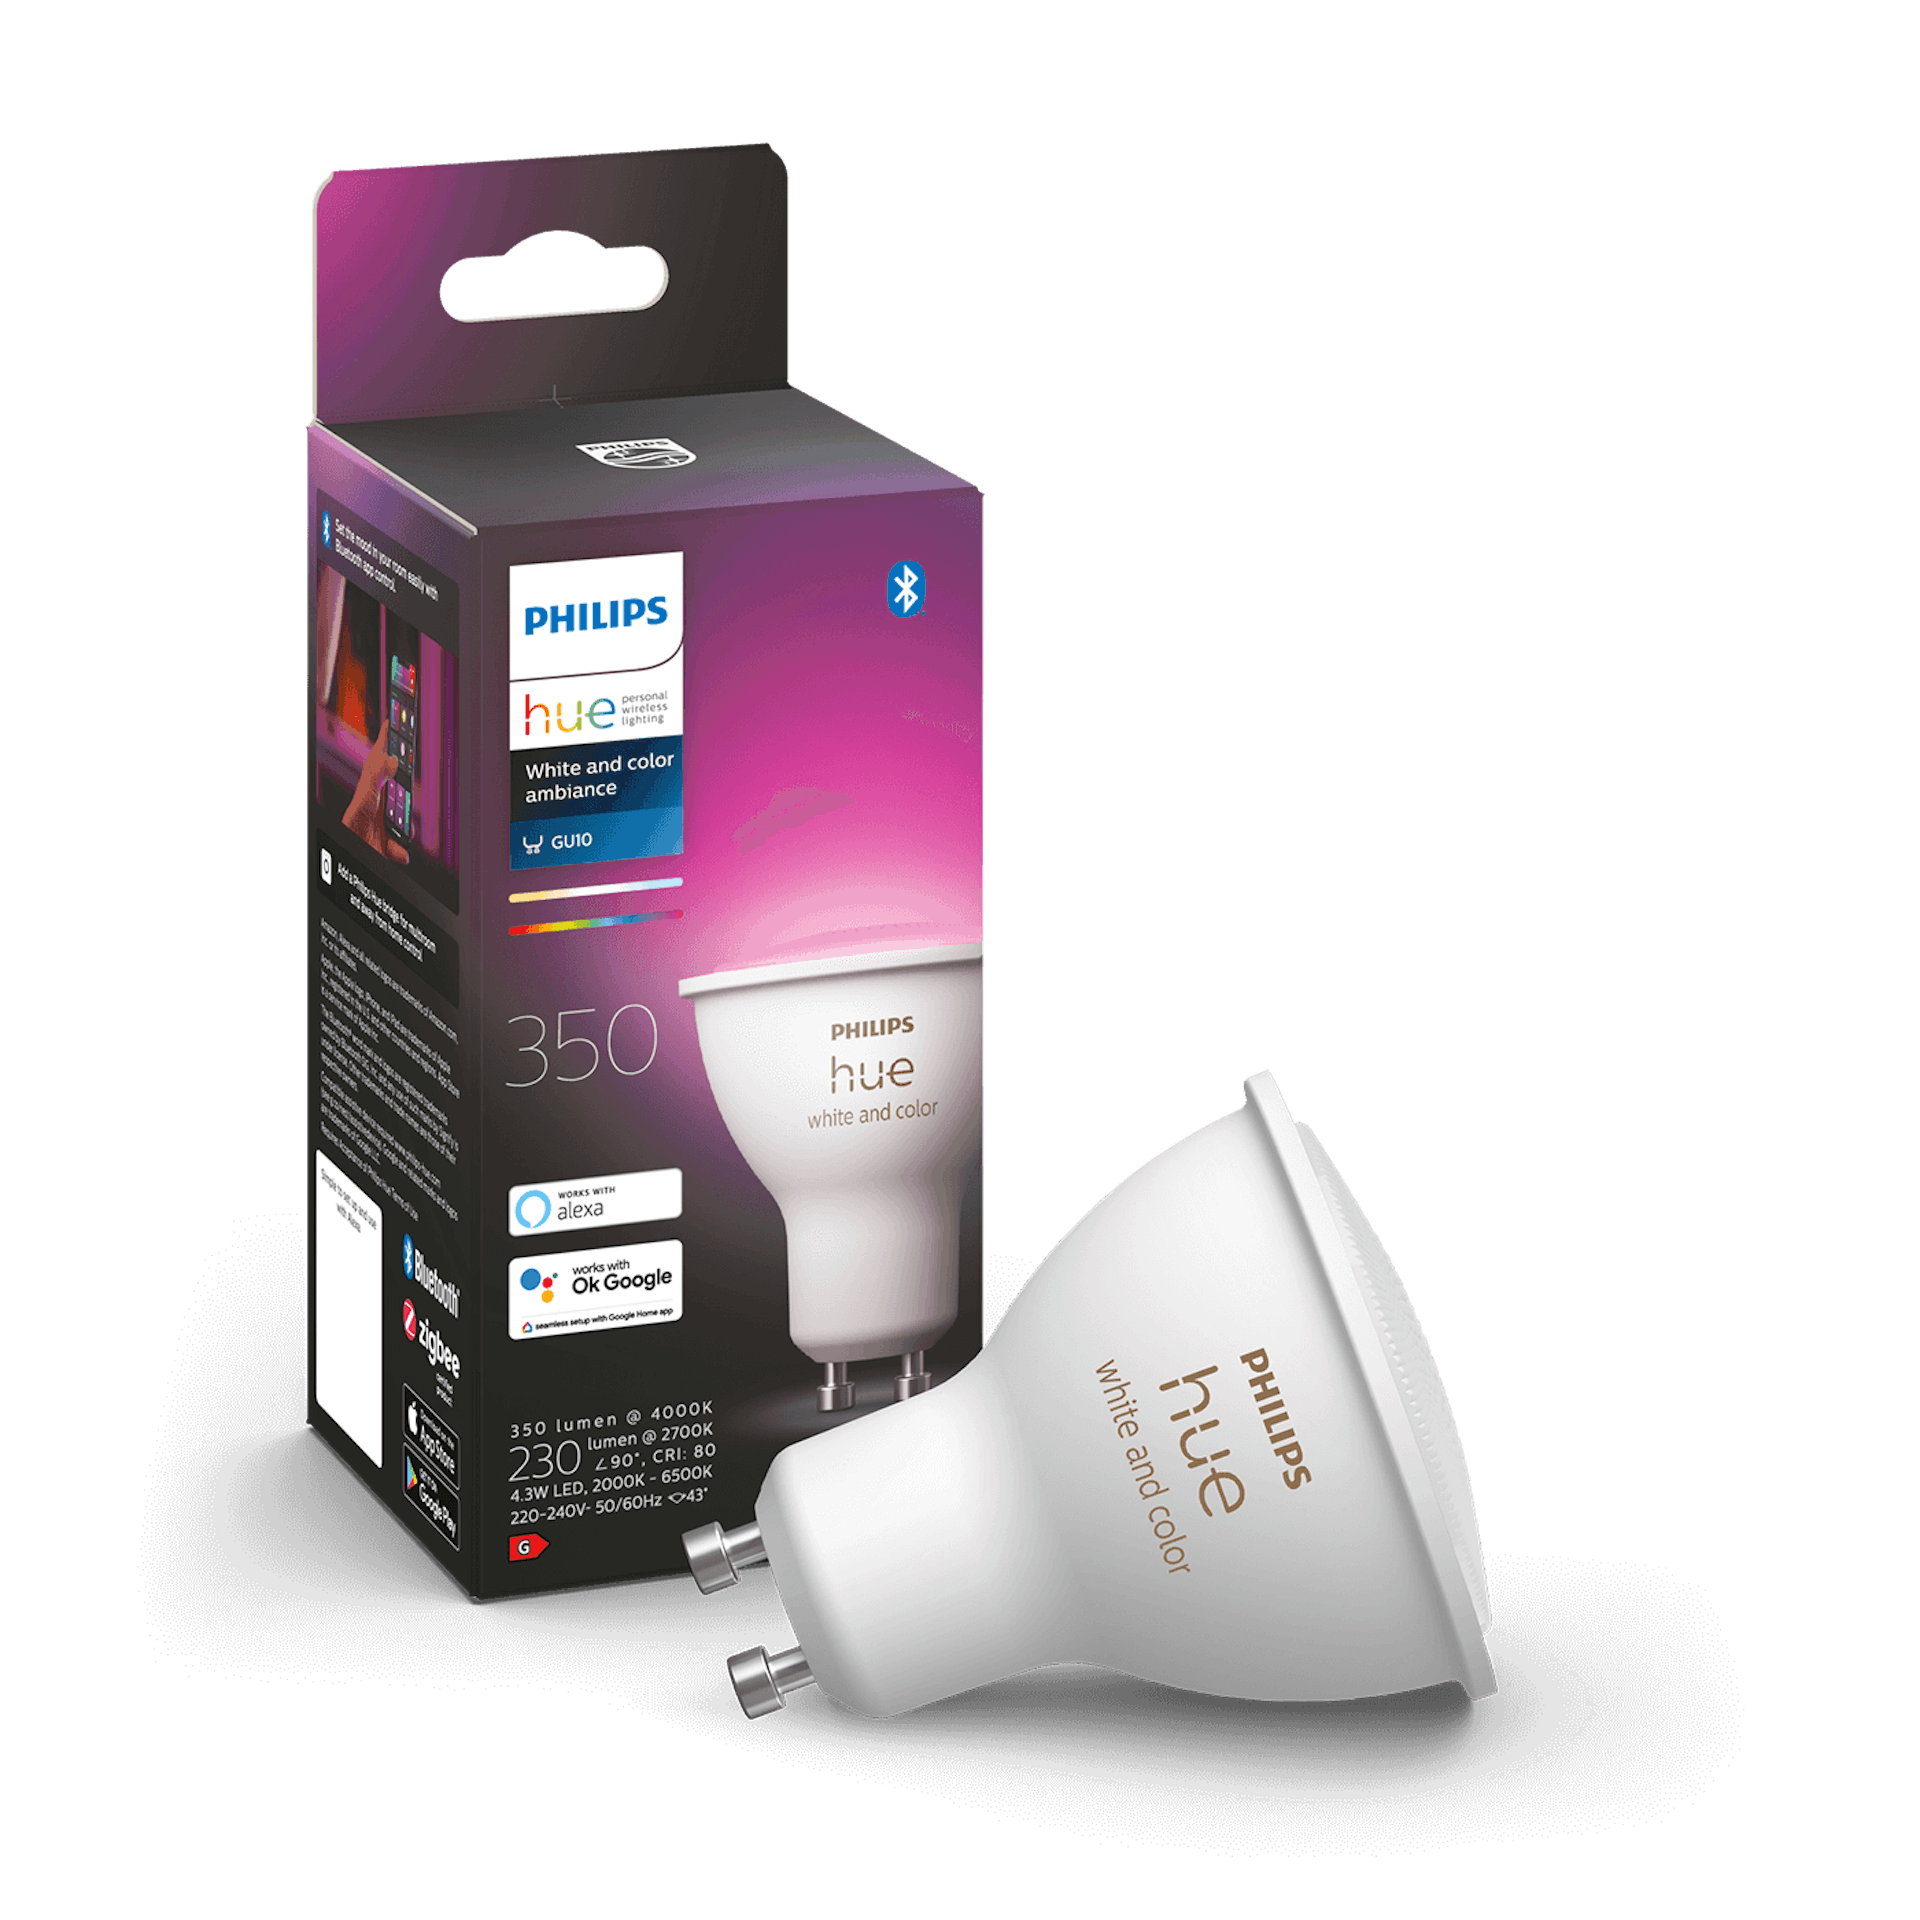 Philips Hue White/Color Ambiance GU10 (G2) - Details - Packaging image